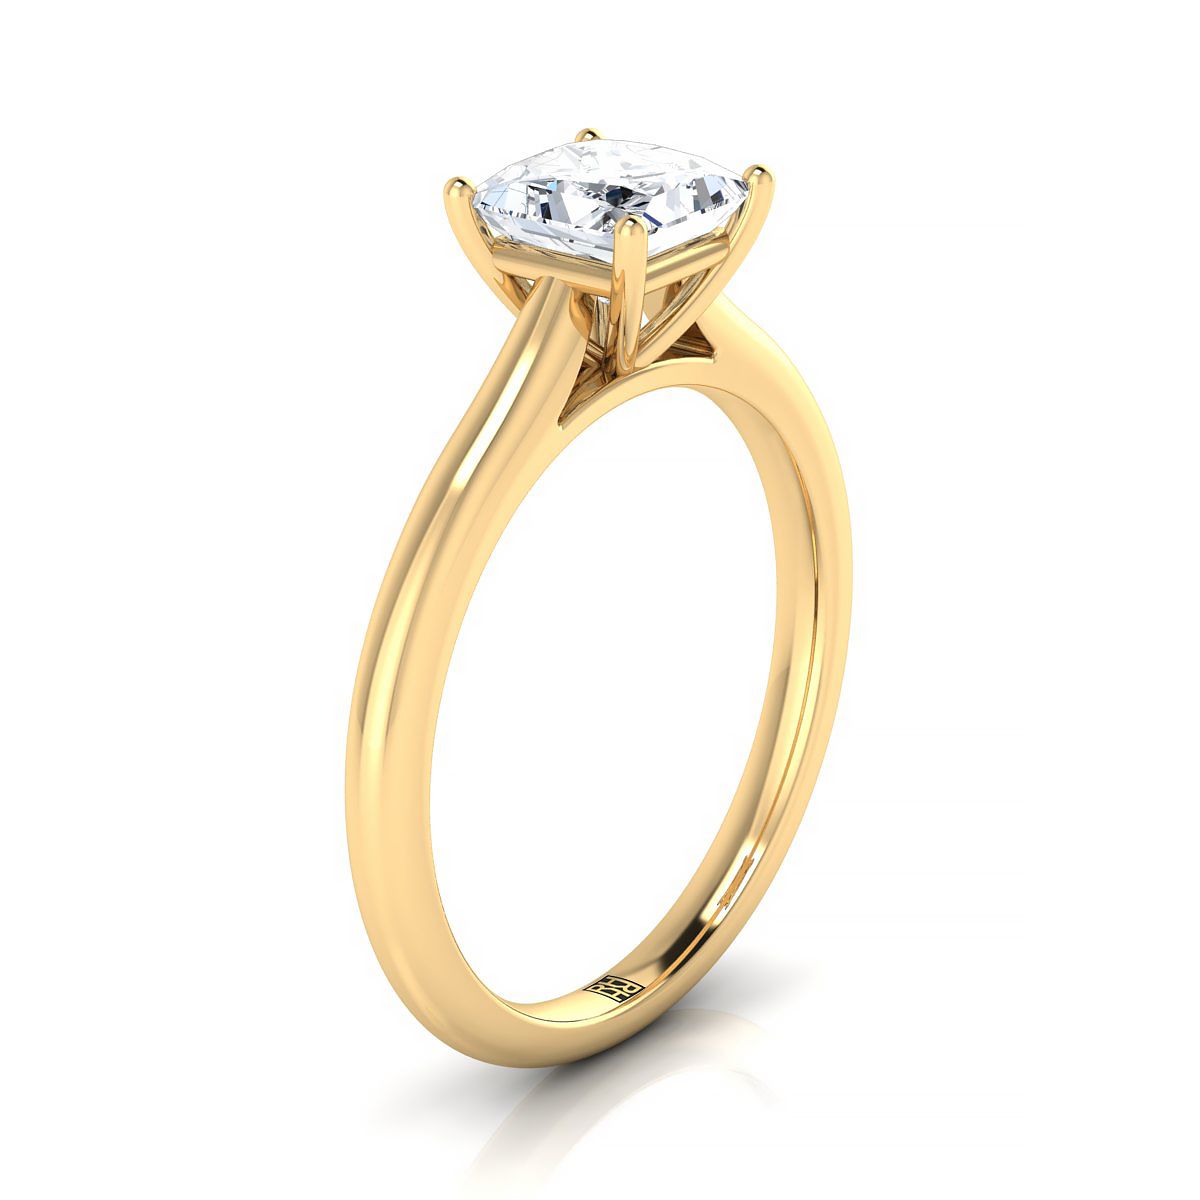 18K Yellow Gold Princess Cut  Pinched Comfort Fit Claw Prong Solitaire Engagement Ring